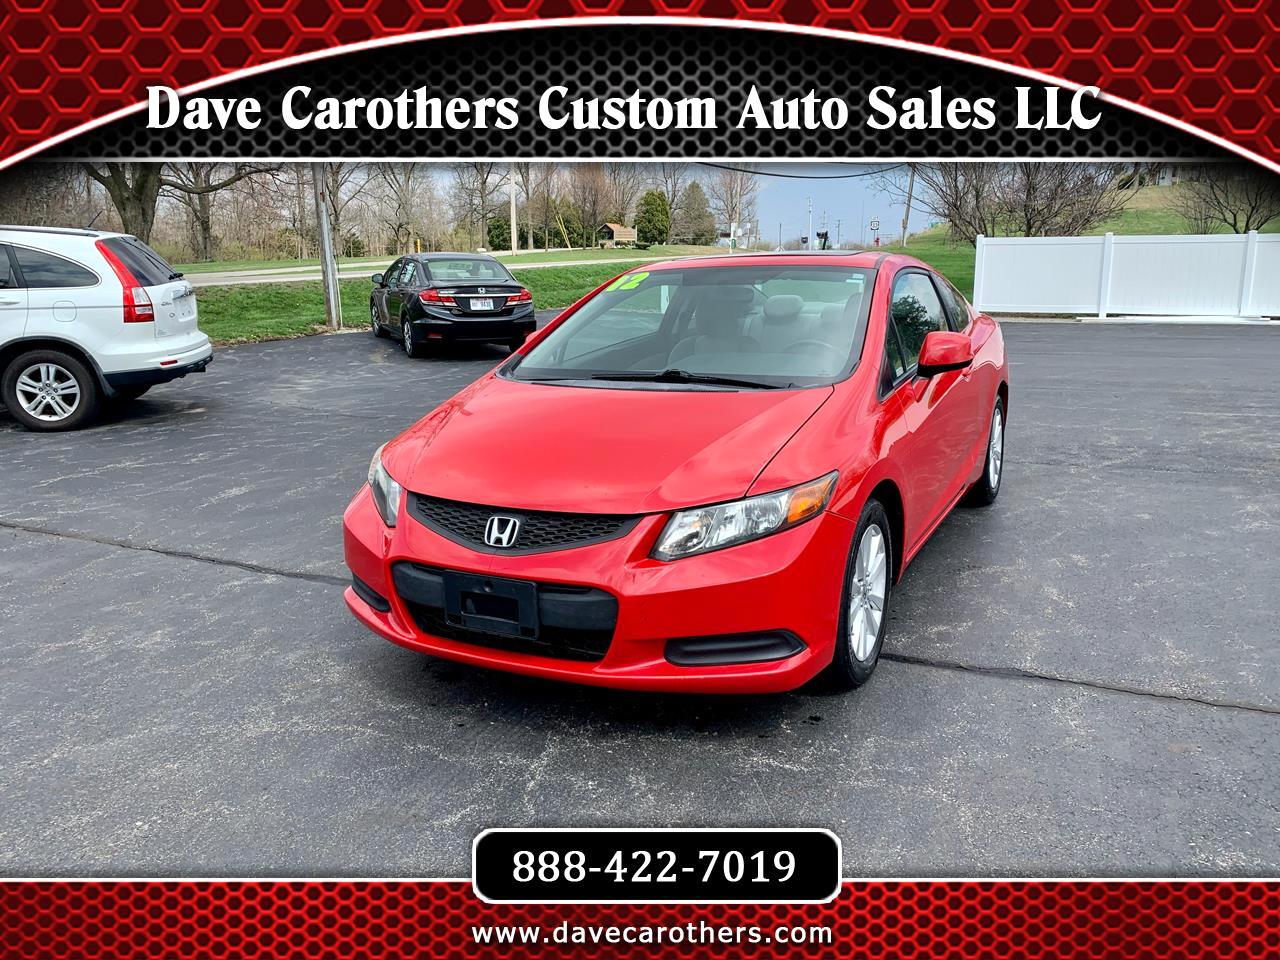 Used 12 Honda Civic Cpe 2dr Auto Ex W Navi For Sale In Bellefontaine Oh Dave Carothers Custom Auto Sales Llc